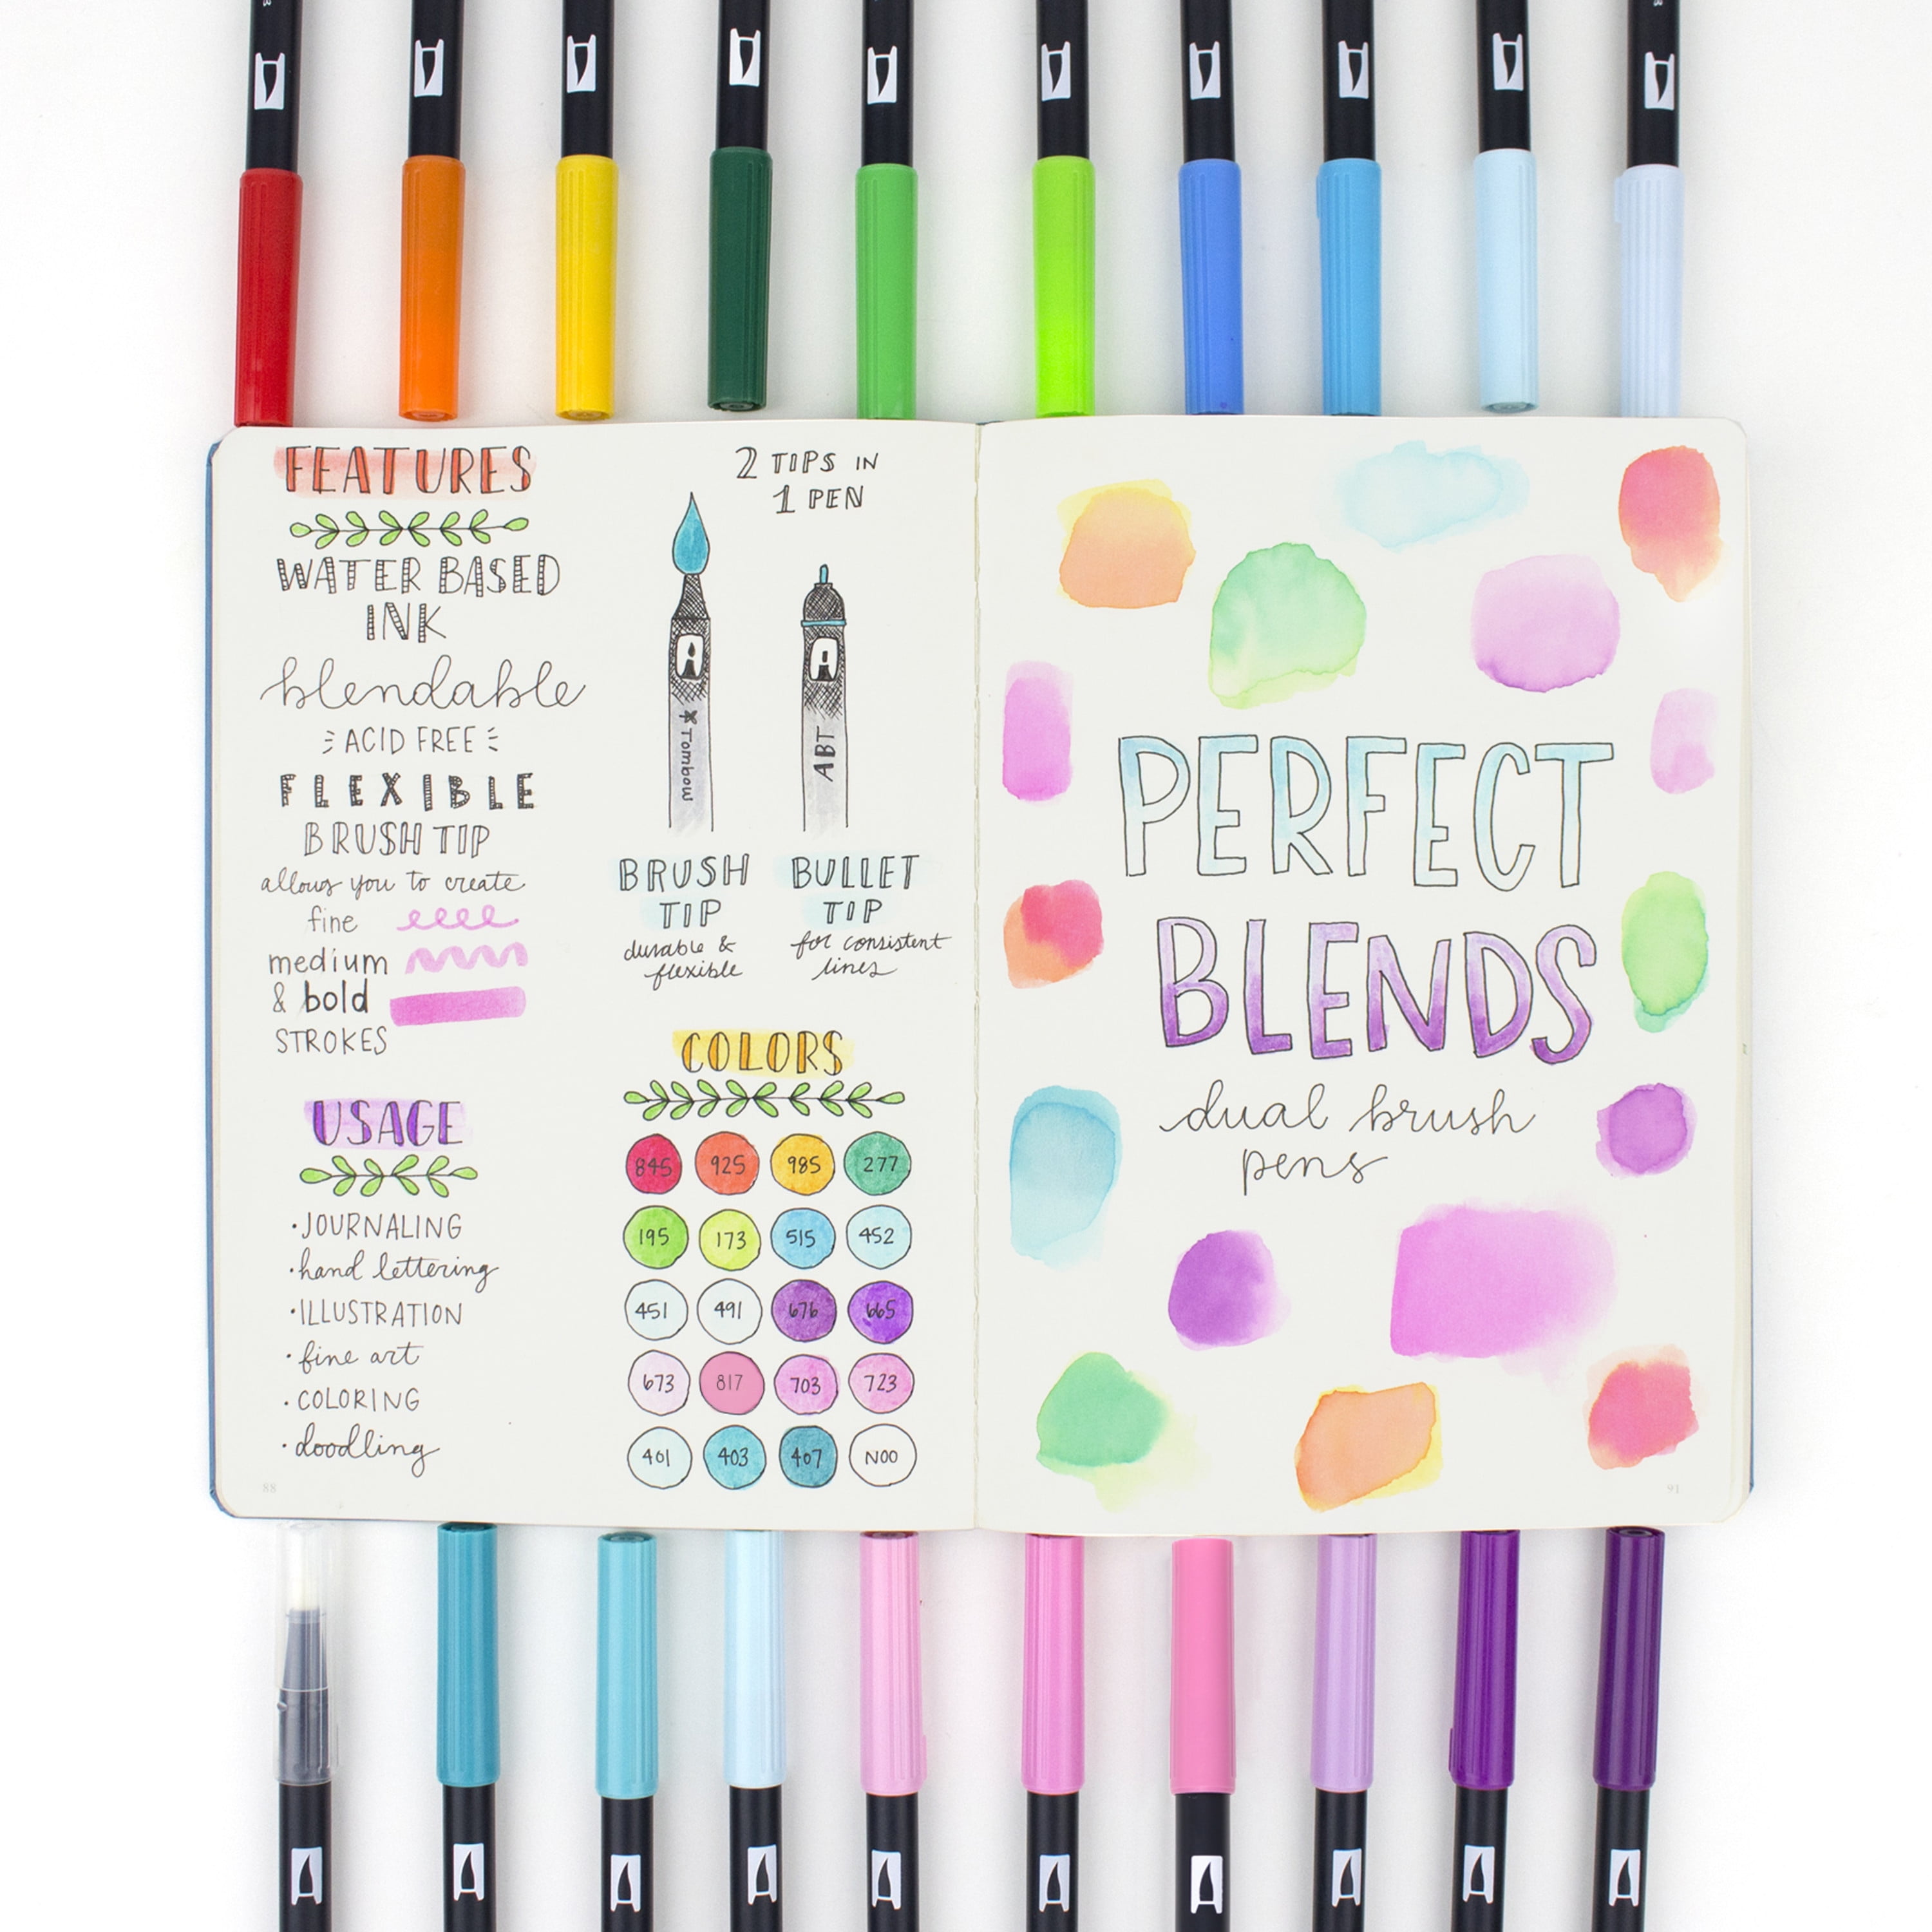 Tombow 56140D Dual Brush Marker Pens-Display 300 Count, With 48 colors;  Blendable colors in a flexible brush and fine tip pen; Water-based dye ink;  Acid-free; Dimensions 14.63 W x 16 H x